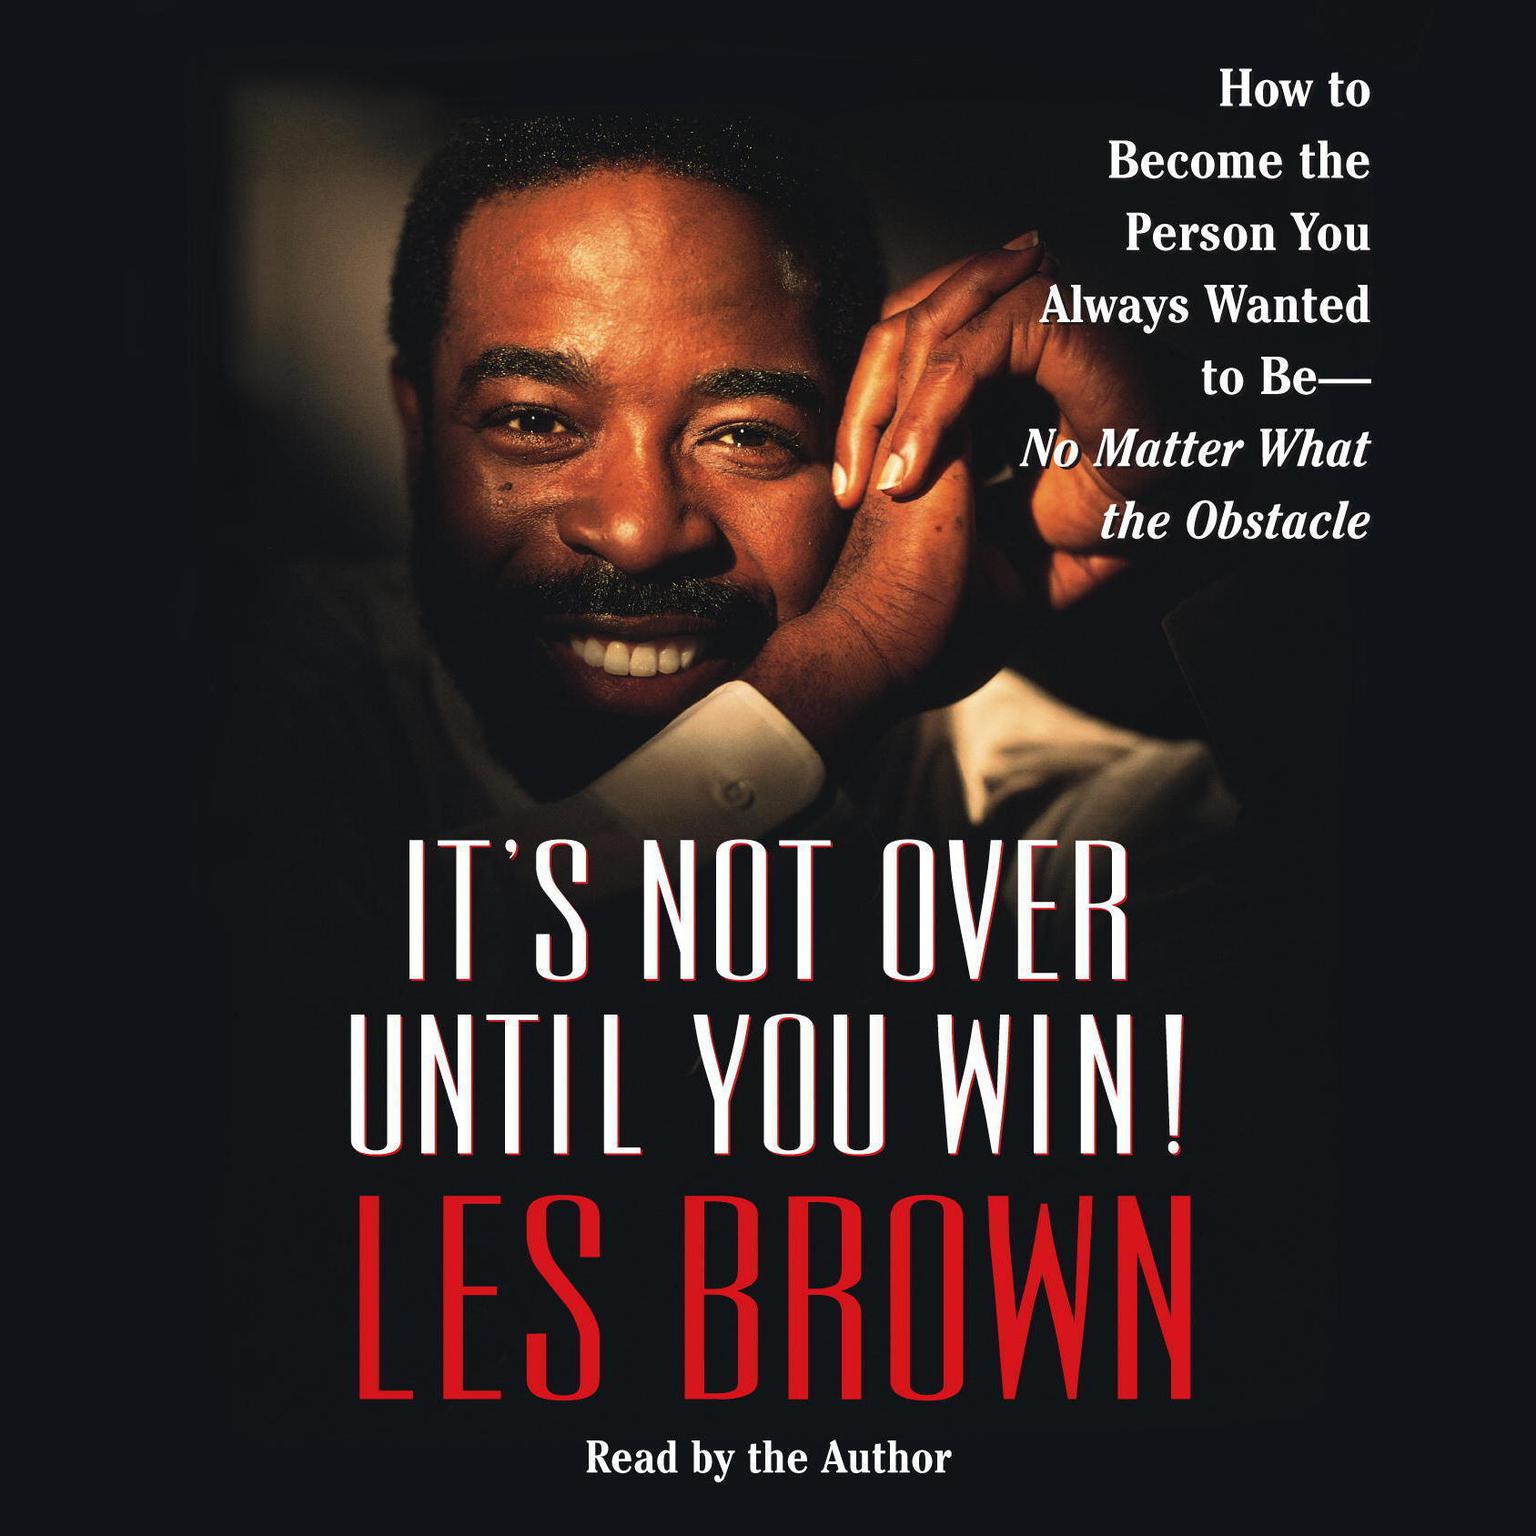 Its Not Over Until You Win (Abridged): How to Become the Person You Always Wanted to Be -- No Matter What the Obstacles Audiobook, by Les Brown